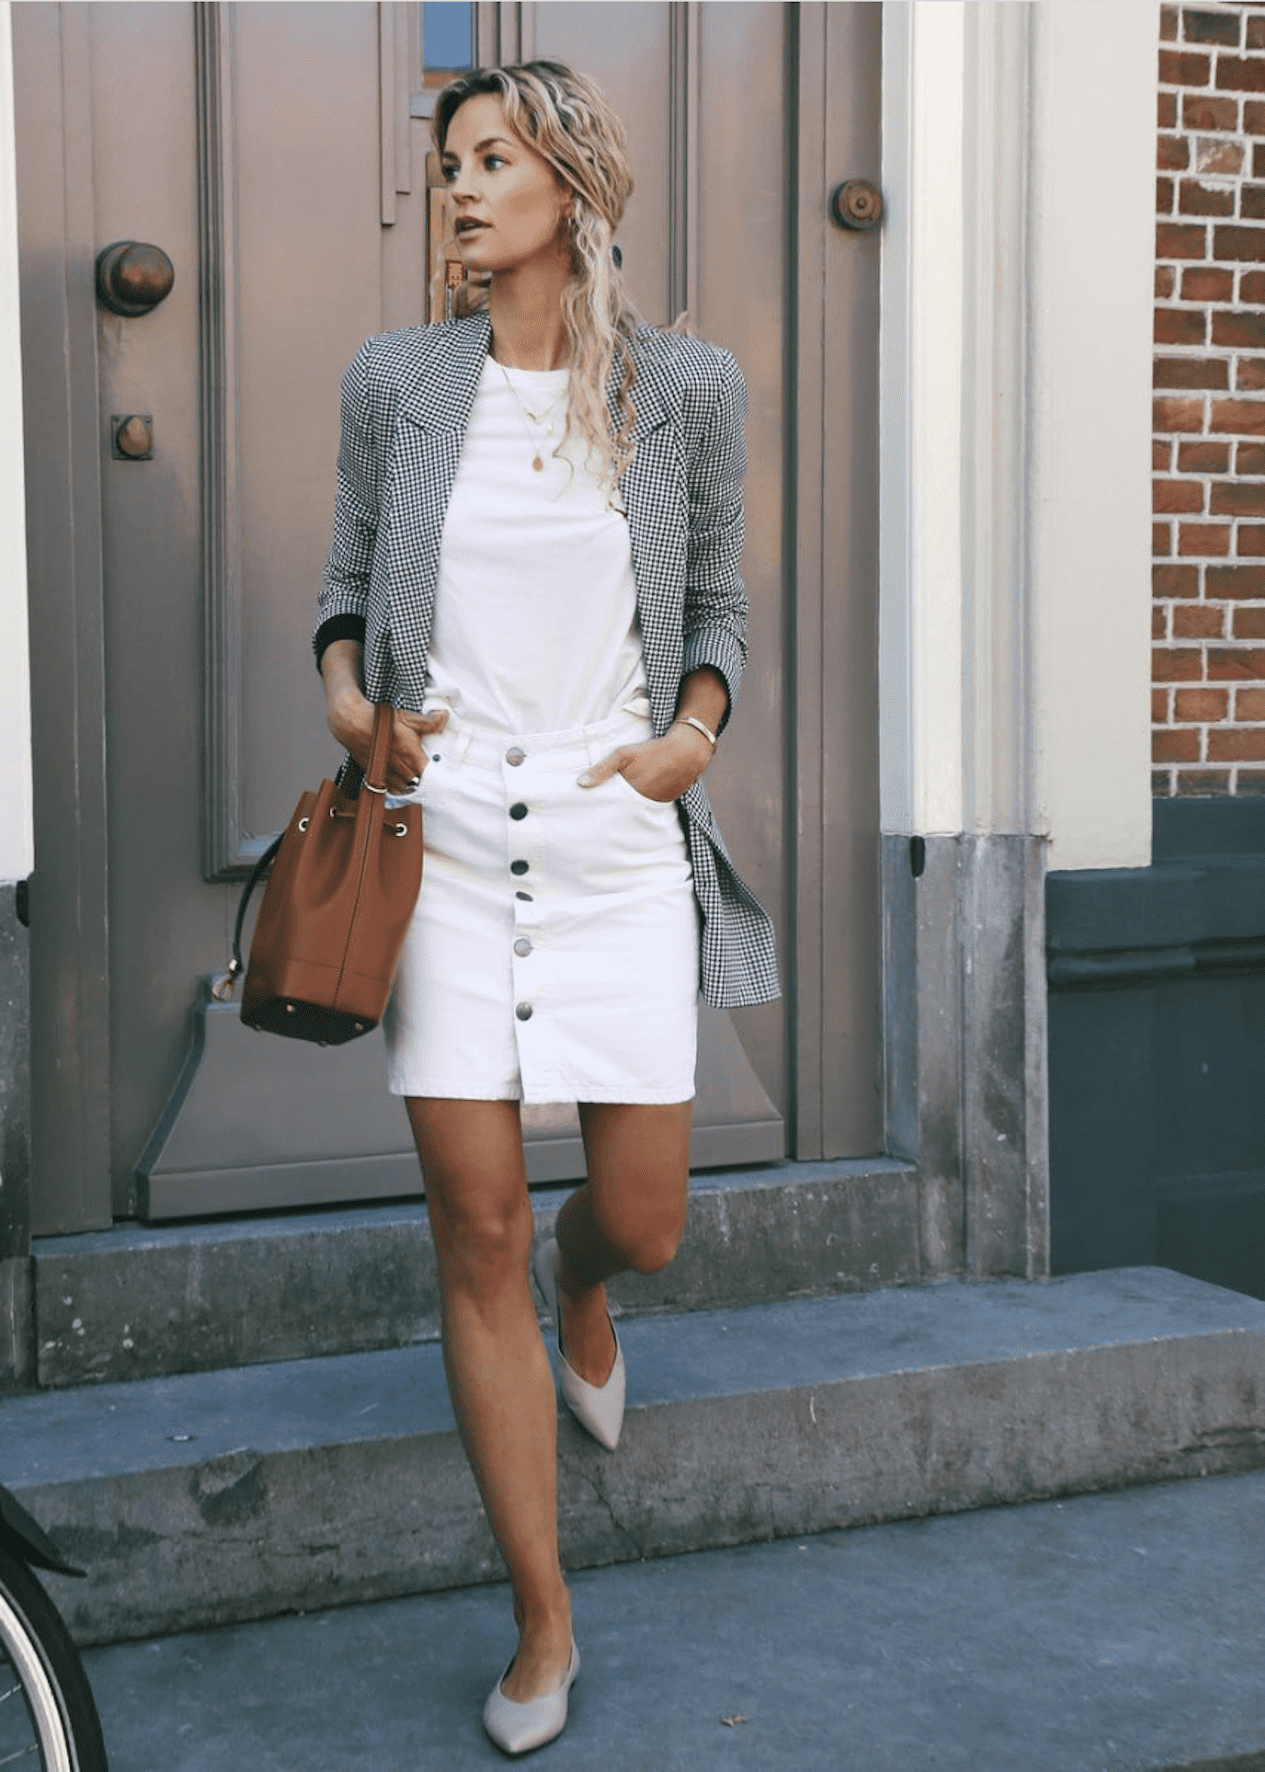 image of a woman in a white button jean skirt, white t-shirt, check blazer, and flats